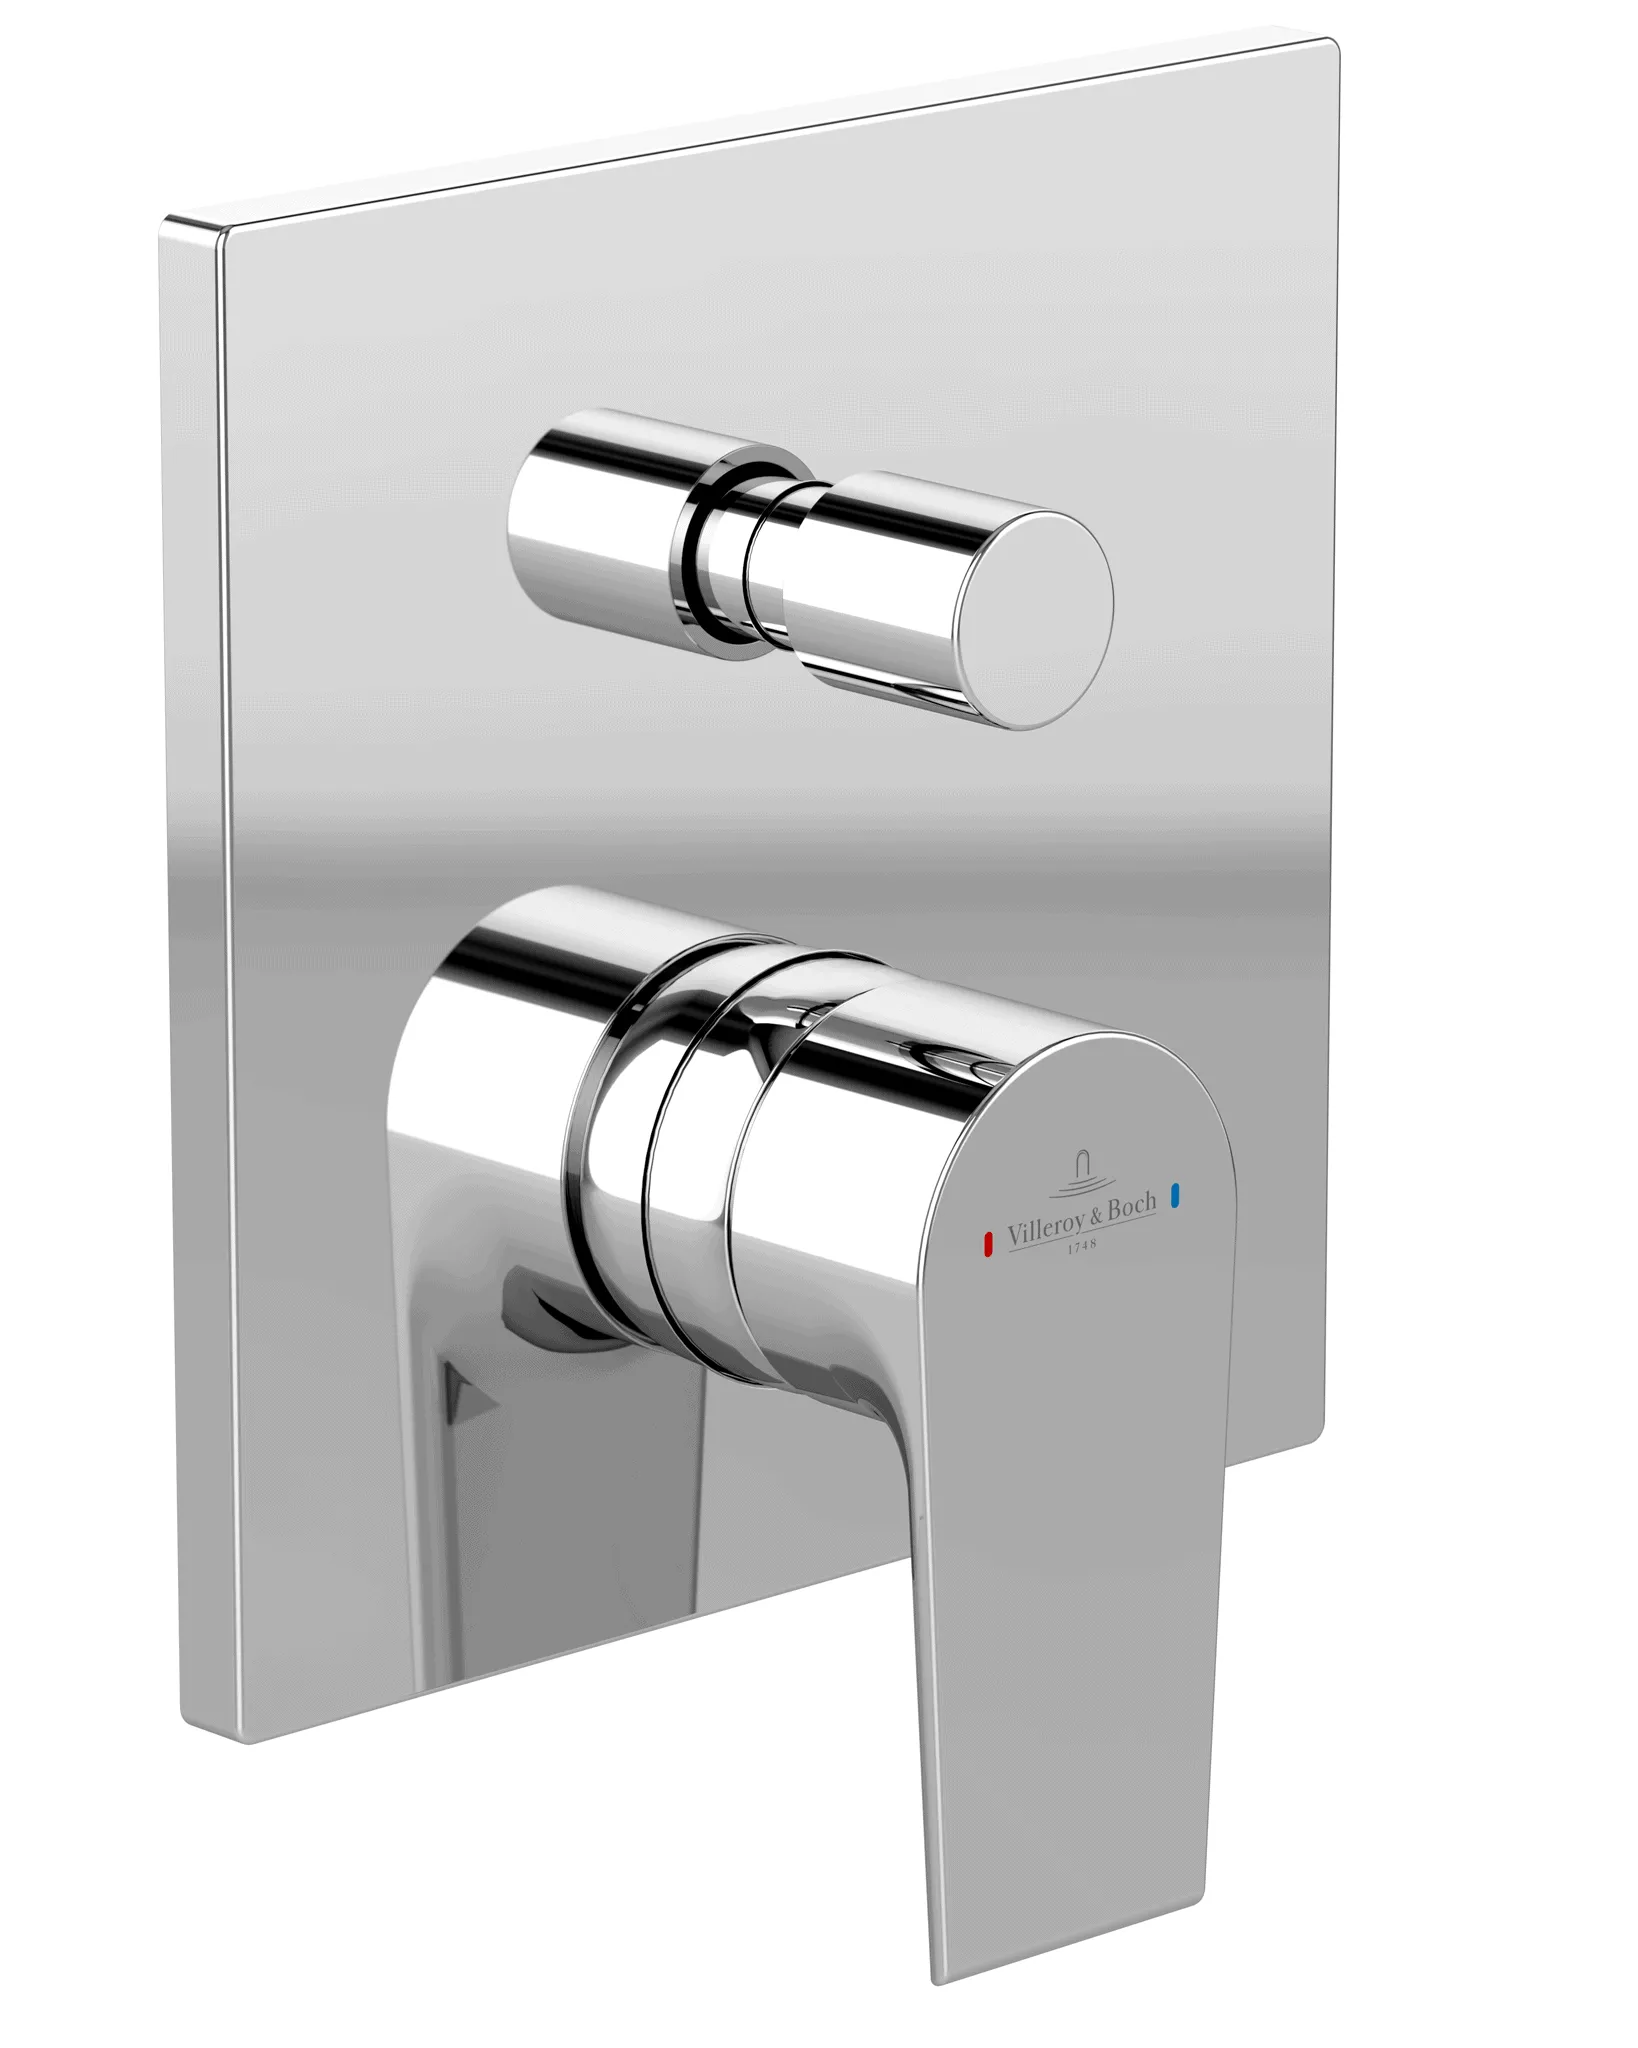 LIBERTY concealed shower mixer